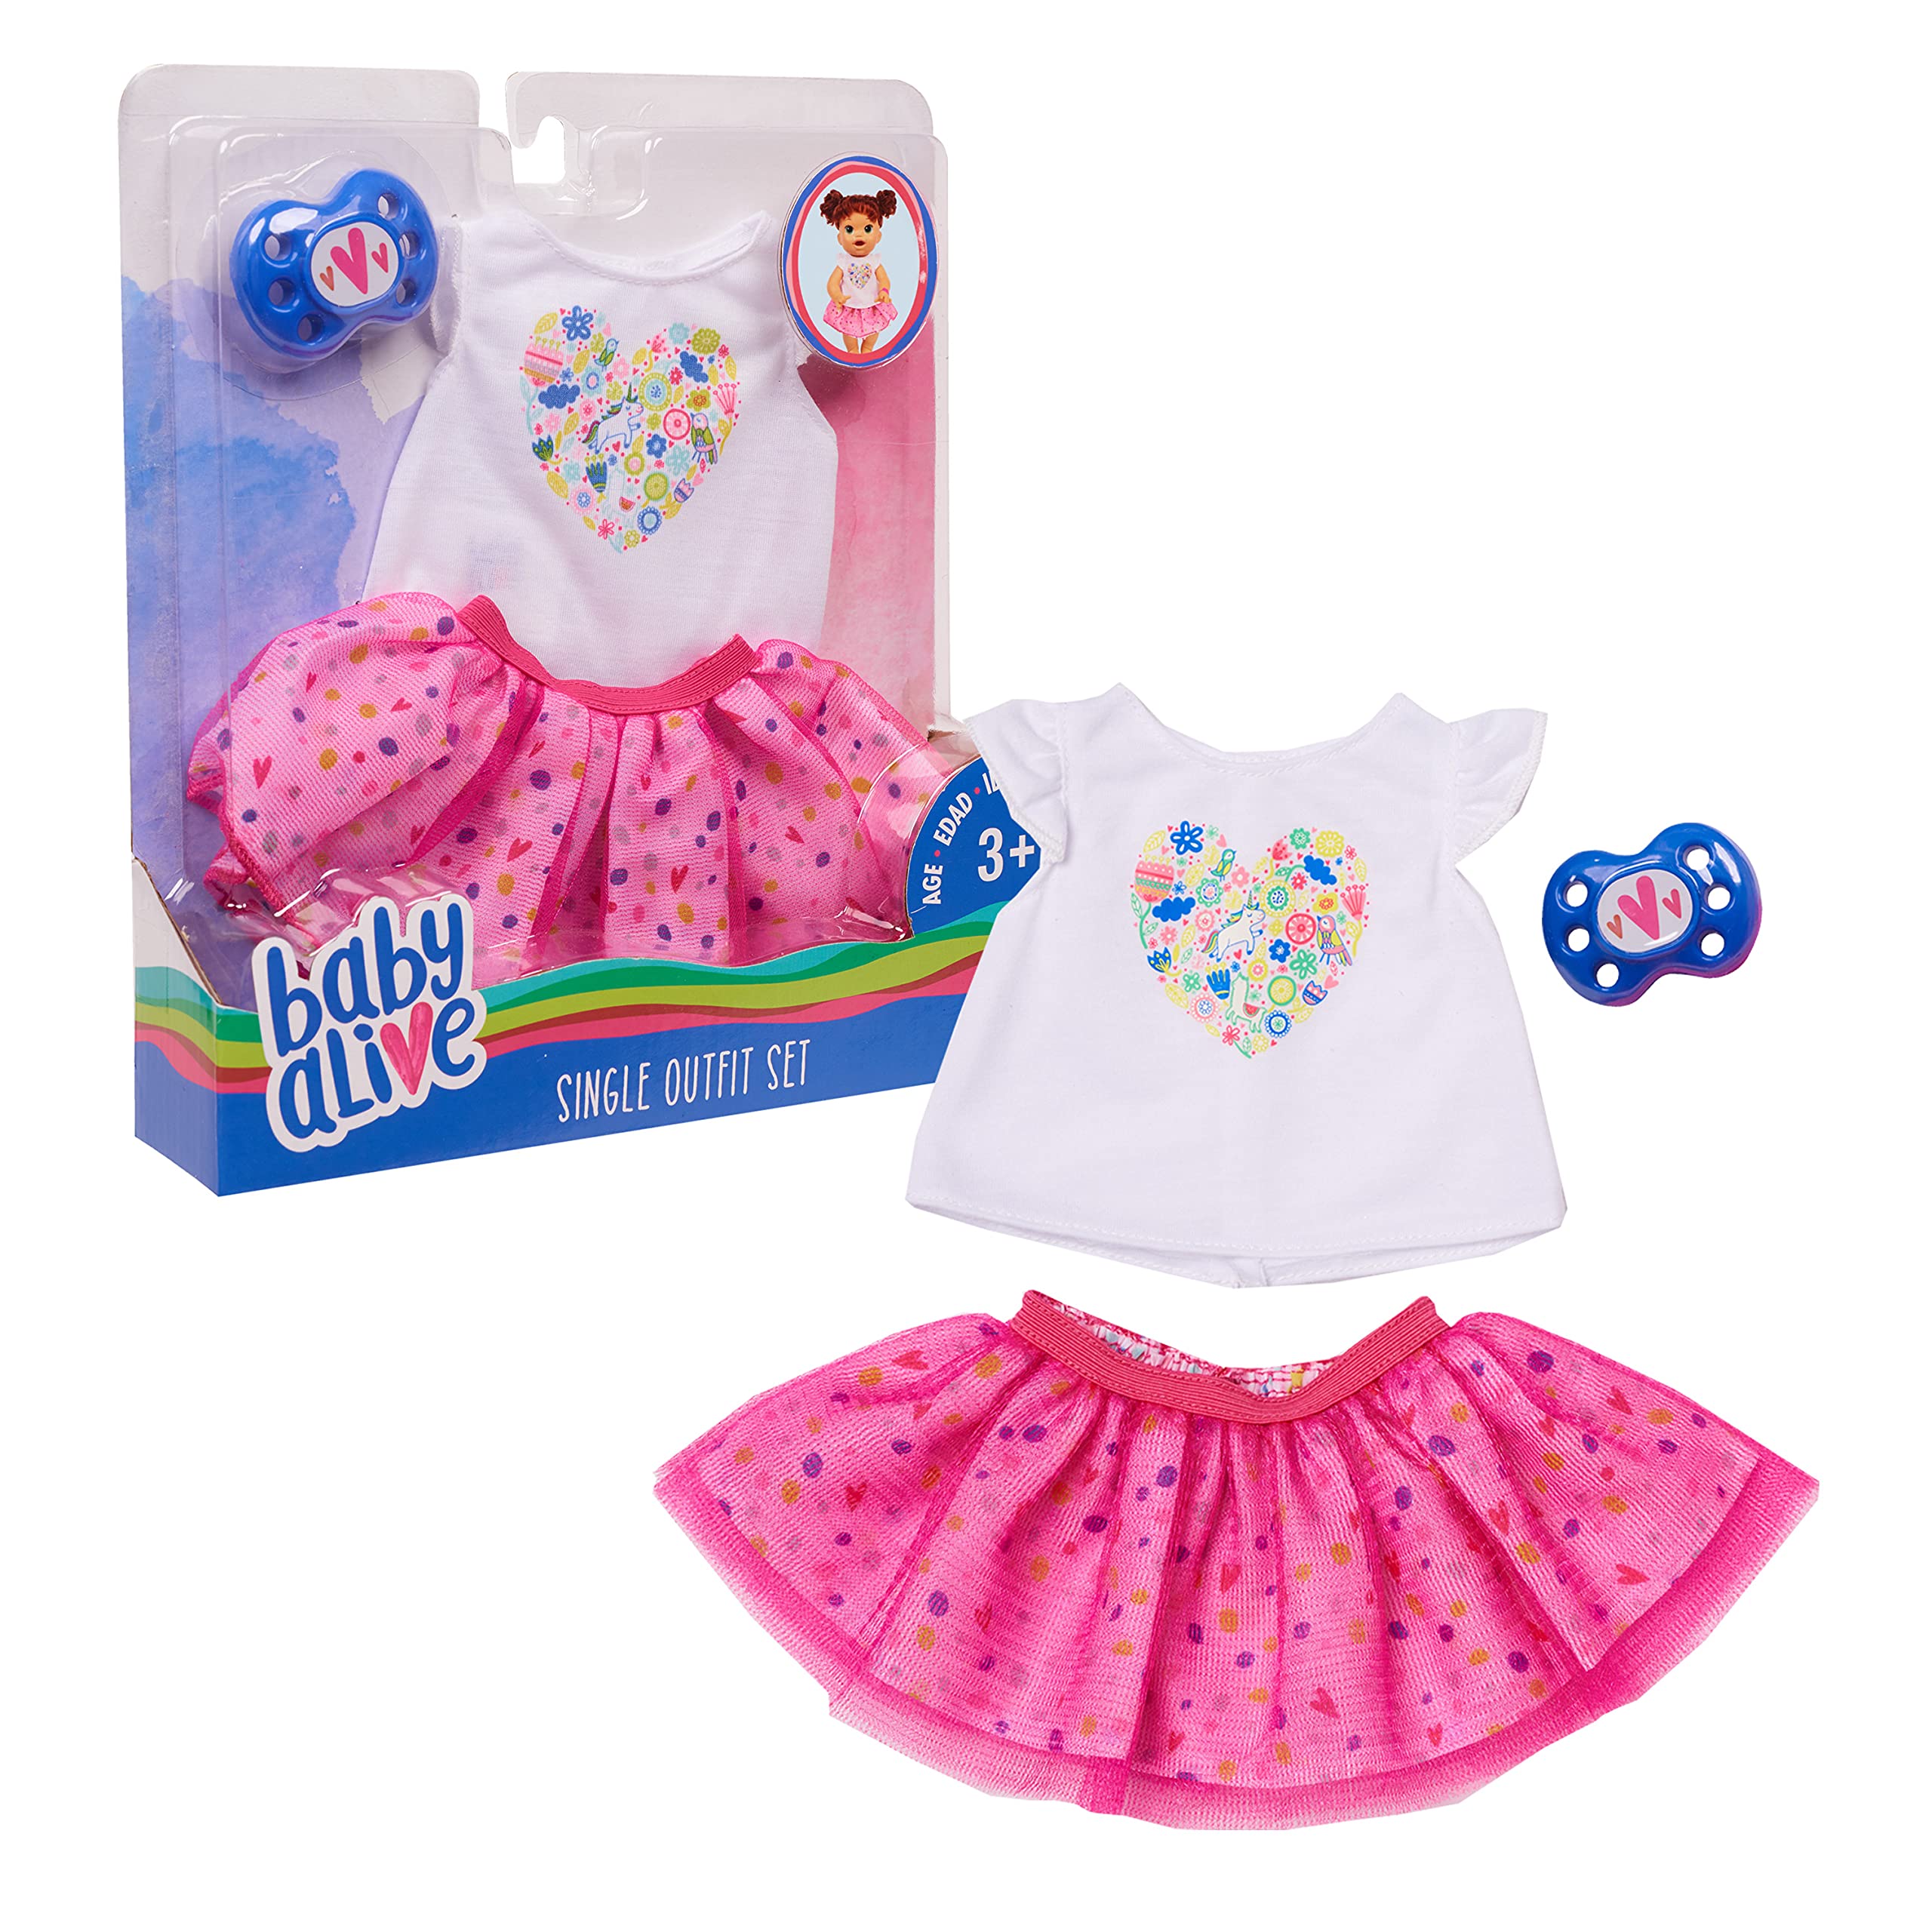 Baby Alive Single Outfit Set, White Tee Pink Tutu, Kids Toys for Ages 3 Up by Just Play